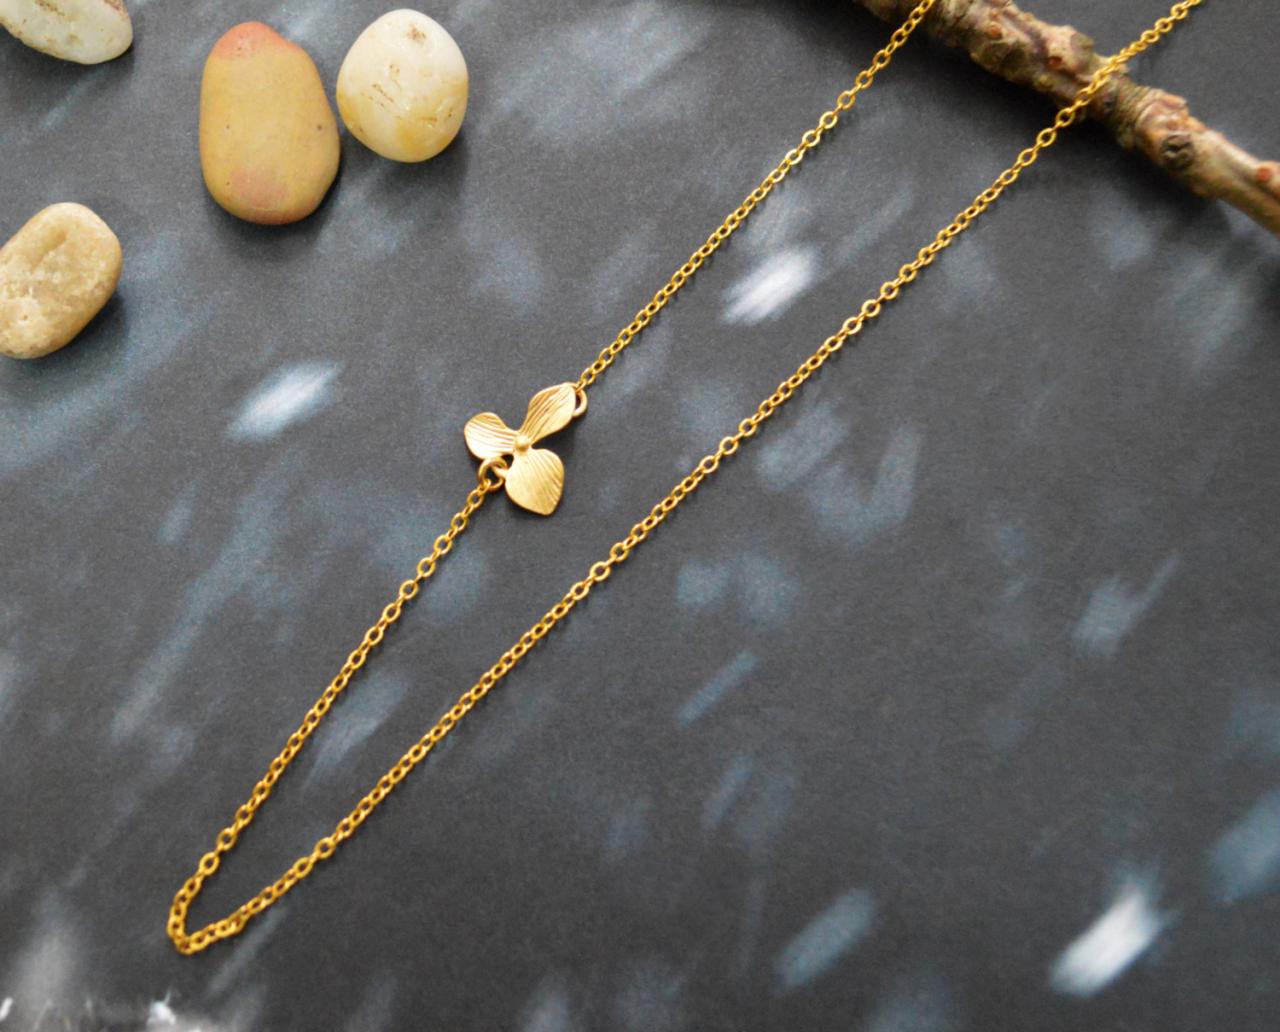 A-182 Sideways Necklace, Orchid, Flower Necklace, Asymmetrical, Unbalanced, Simple Necklace, Gold Plated/everyday Jewelry /special Gift/